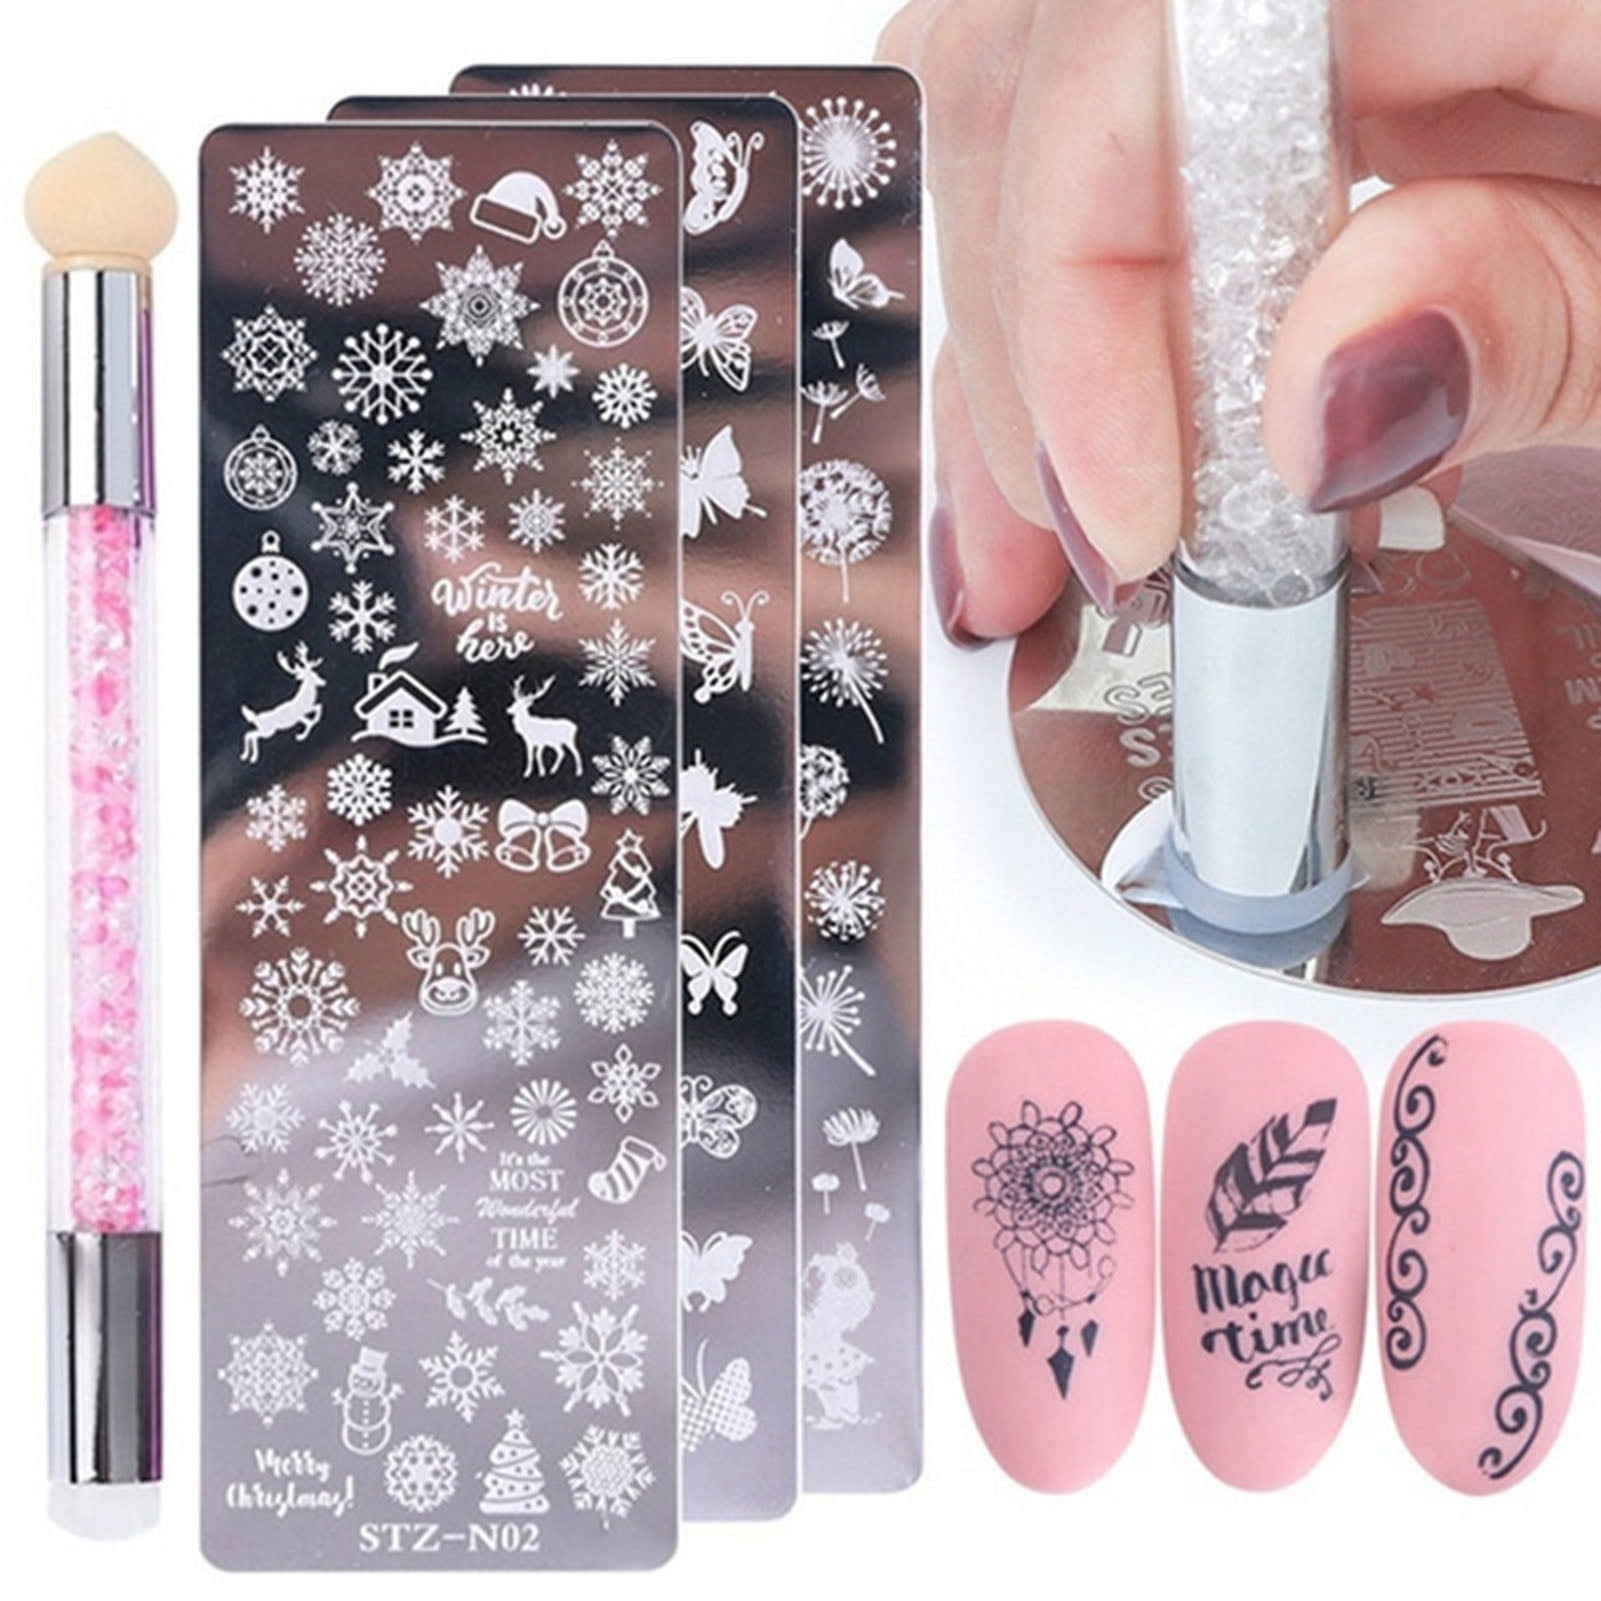 20-Piece Nail Art Gel Design and Painting Set - Precision Brushes